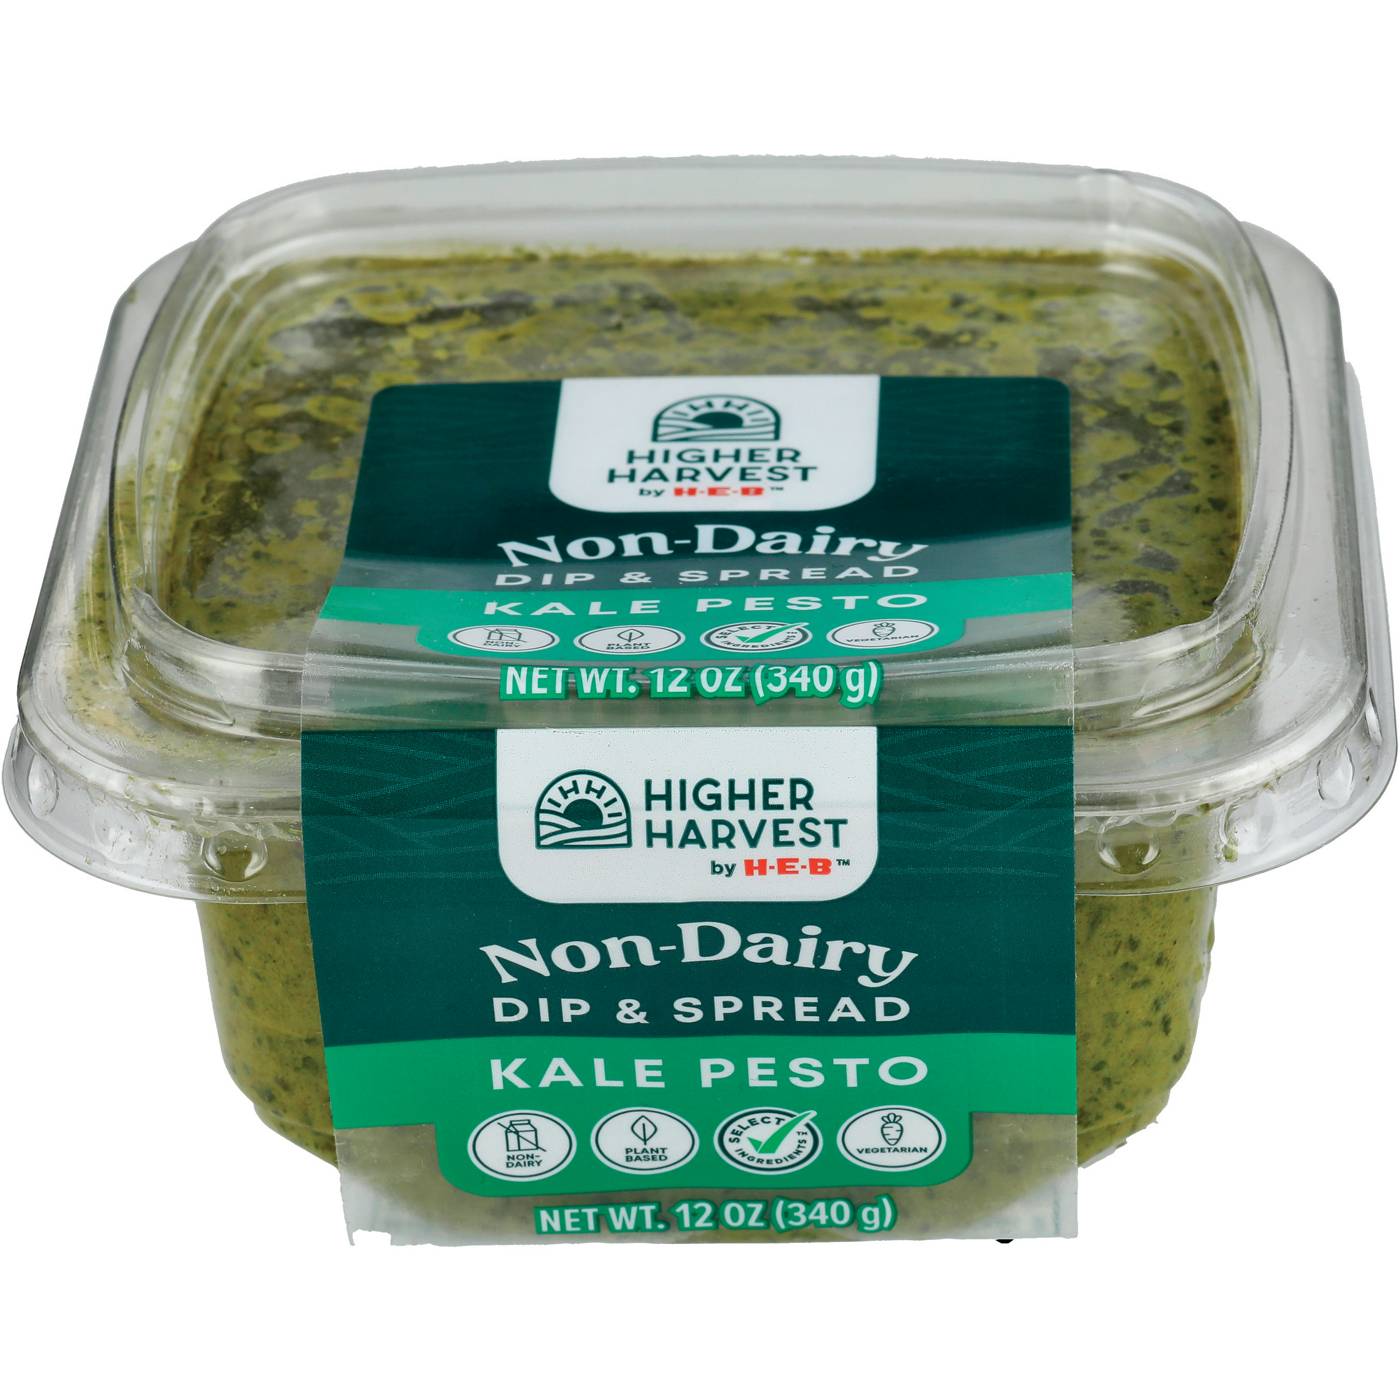 Higher Harvest by H-E-B Non-Dairy Dip & Spread - Kale Pesto; image 3 of 3